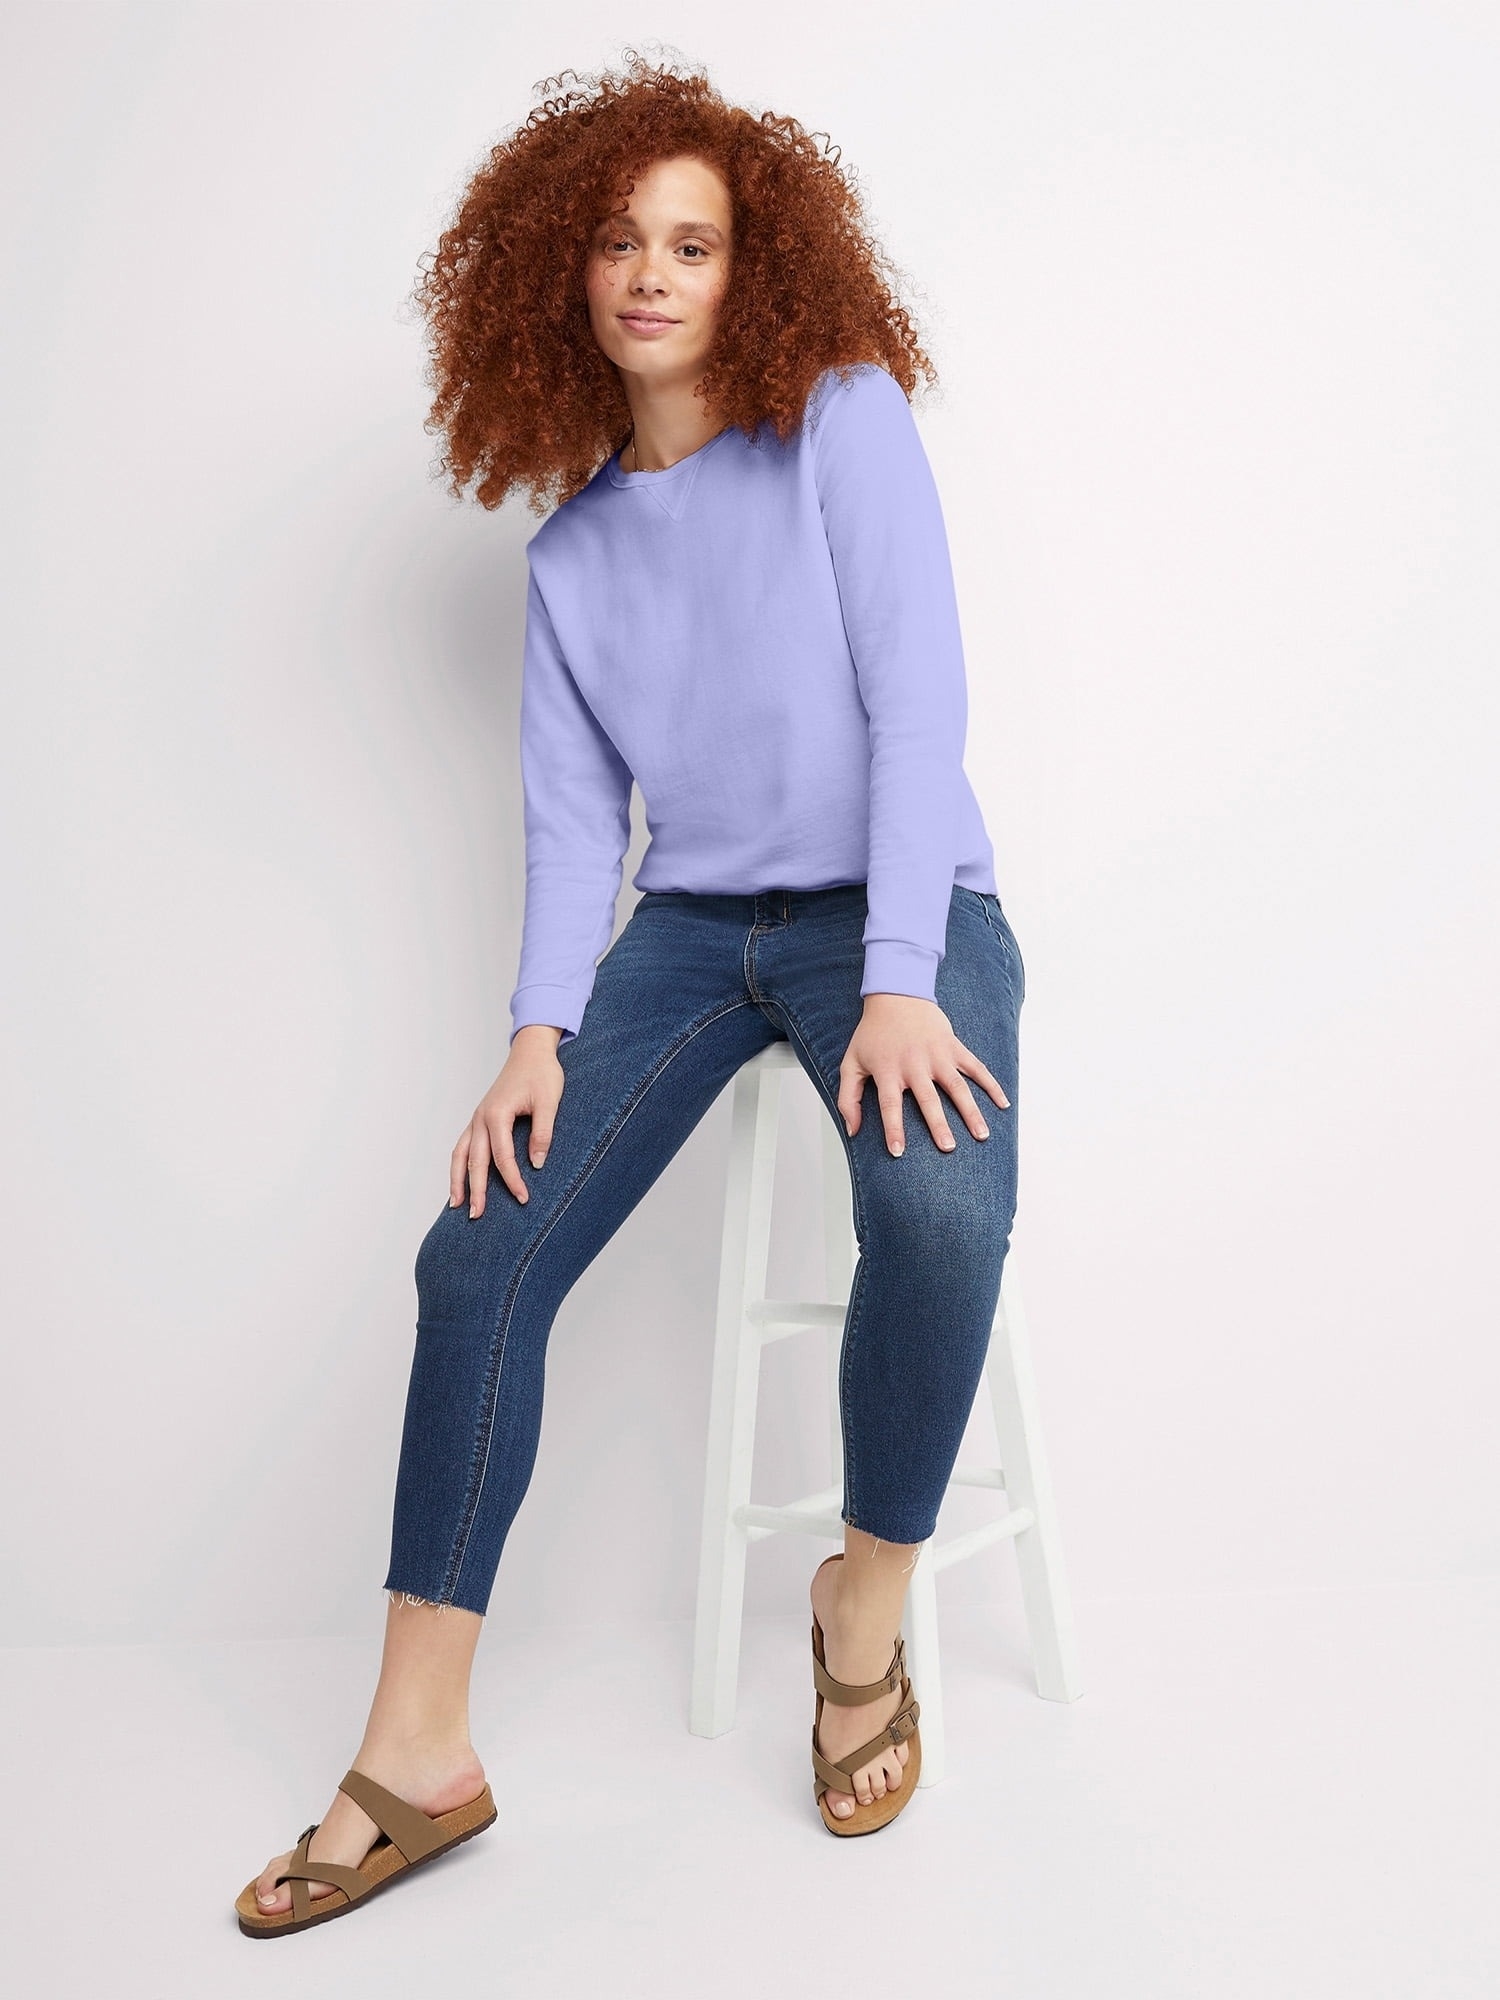 model in a long-sleeve periwinkle top and jeans sitting on a stool